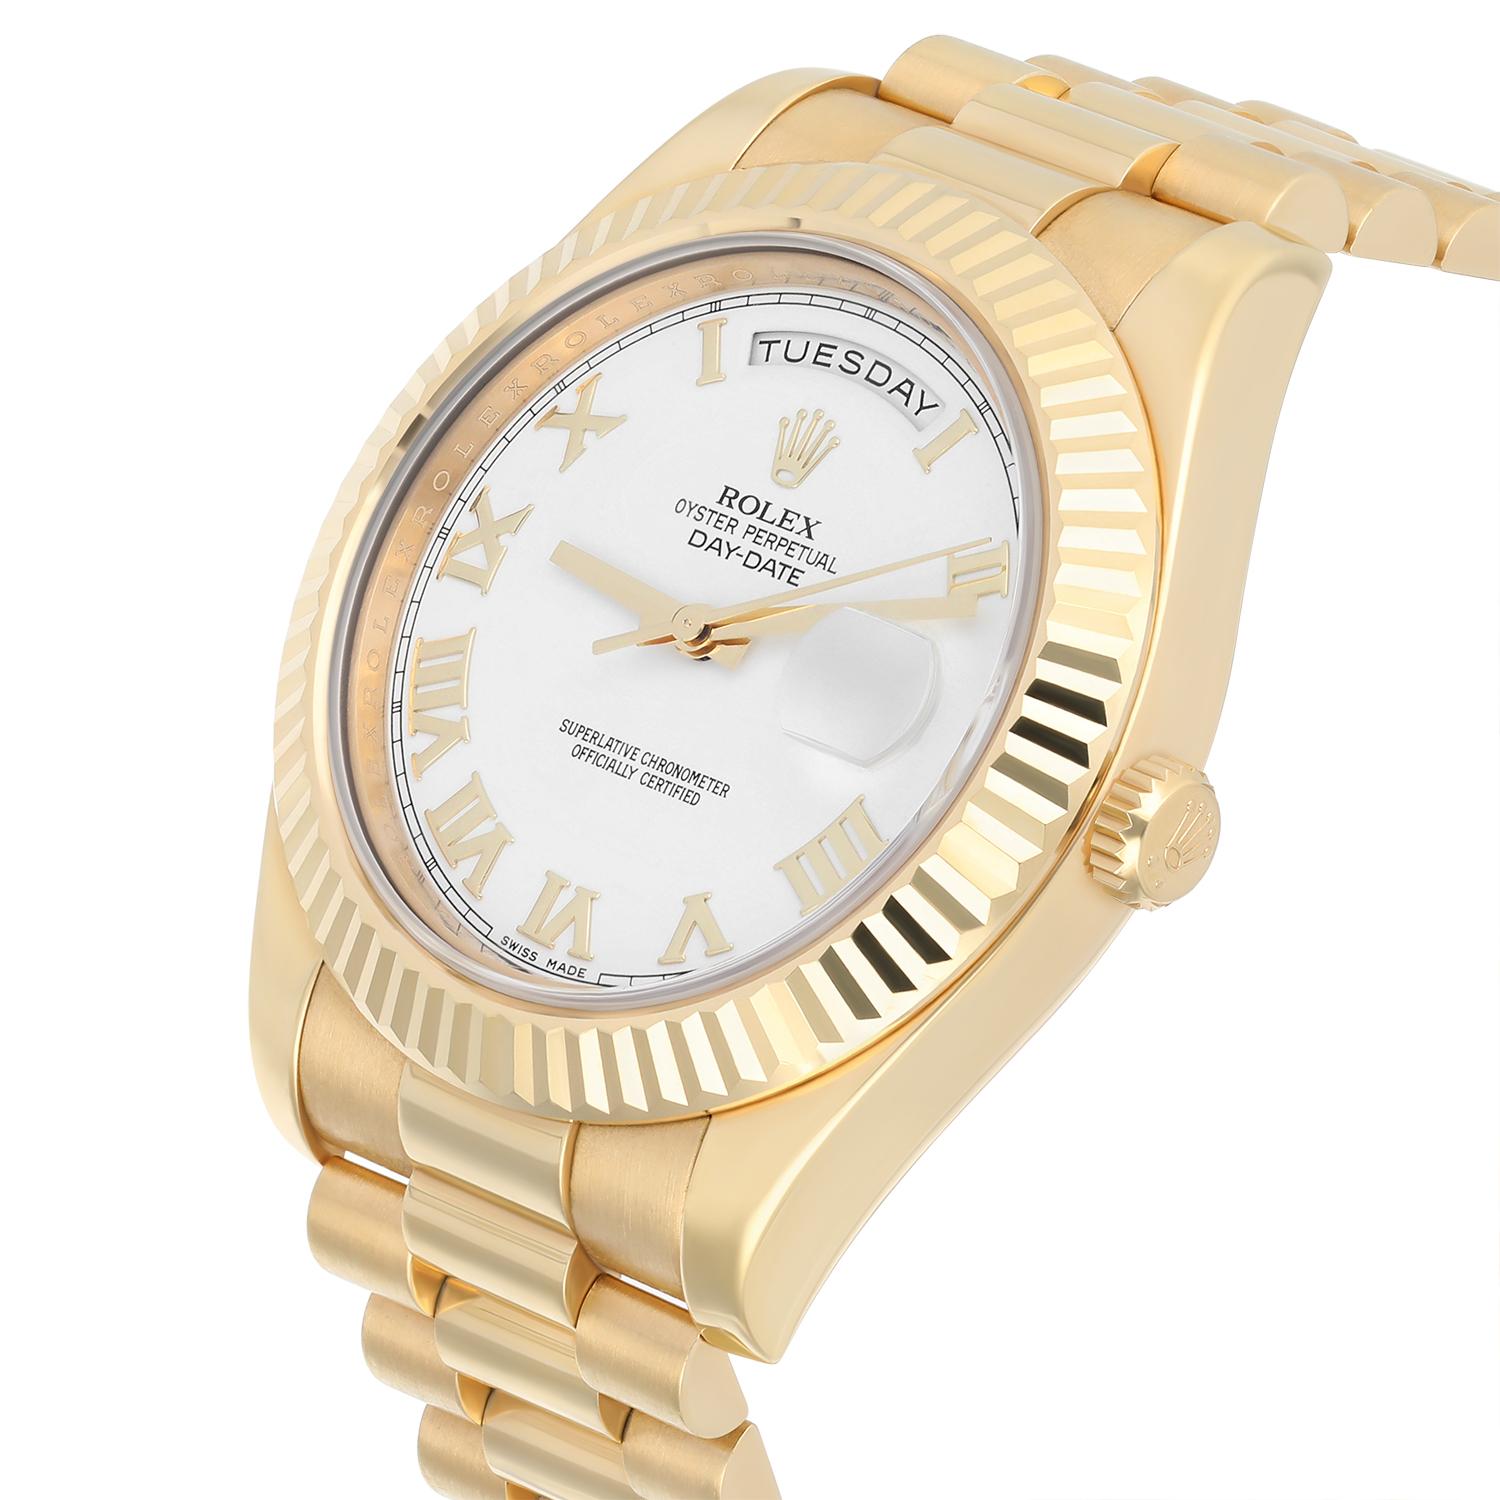 Rolex Day-Date II 218238 Yellow Gold Watch White Roman Dial Complete For Sale 1